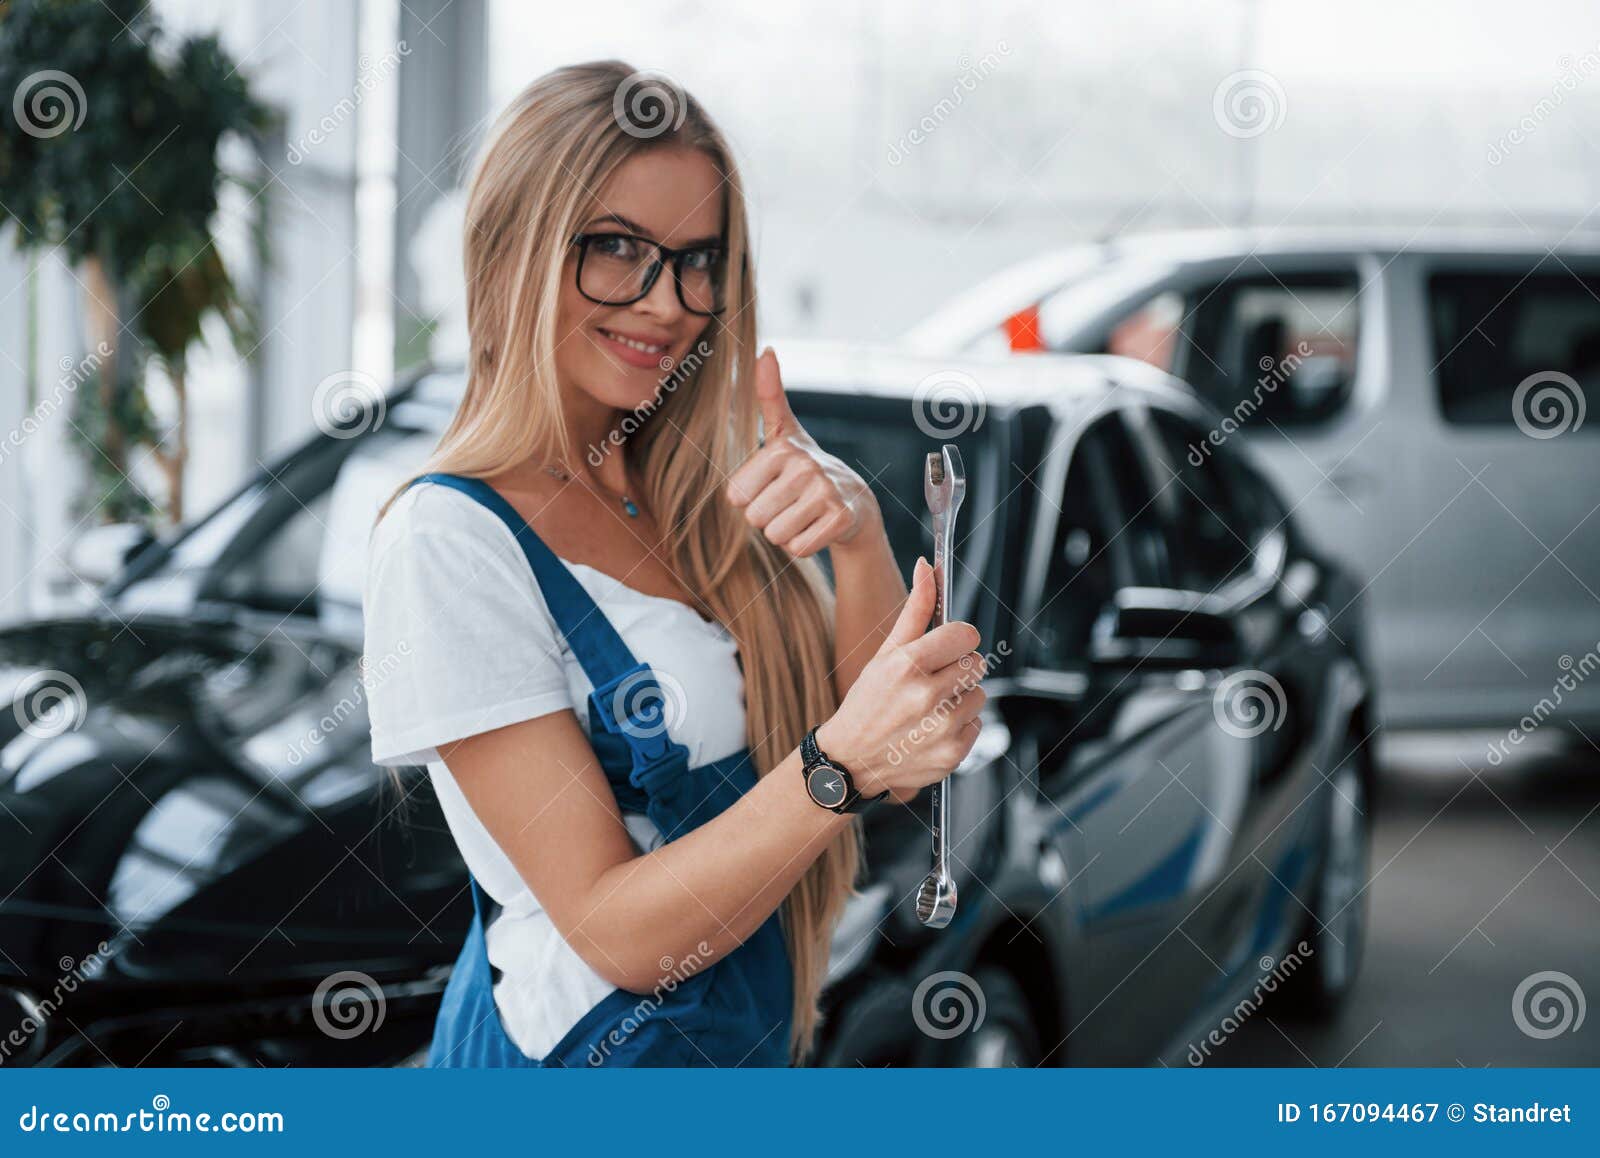 Everything Will Be Okay with Your Vehicle. Nice Blonde Woman Repairer ...